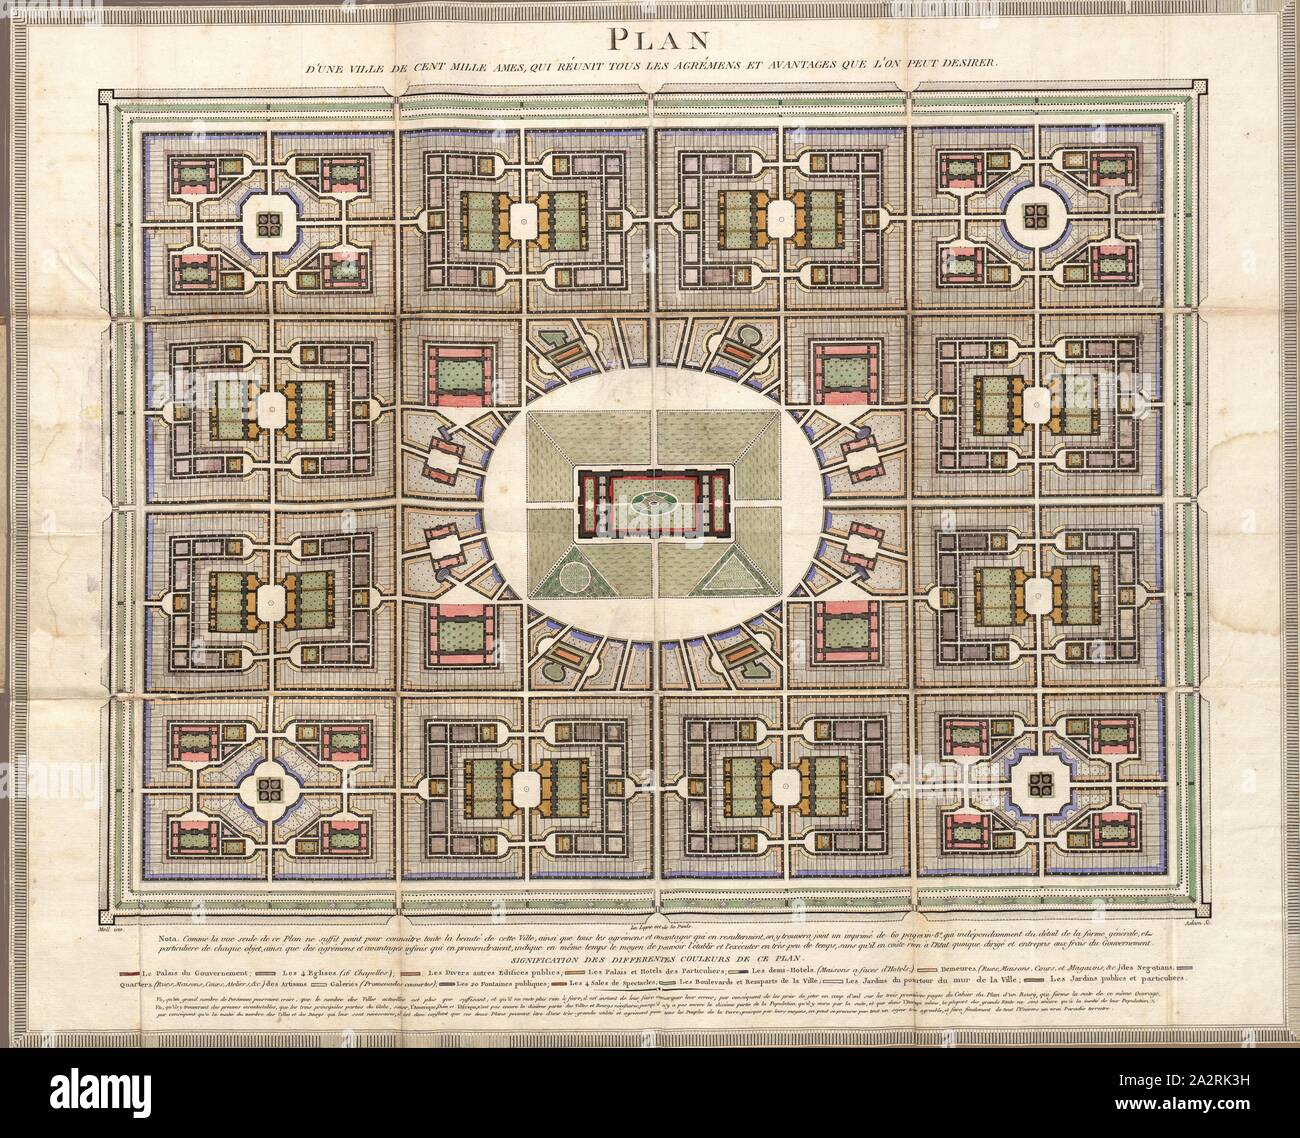 Plan of a City of one hundred thousand souls, which brings together all the amenities and advantages that may be desired, Plan of a city for ten thousand inhabitants from the 19th century, signed: Moll inv, Adam sc, Taf. 1, according to p. 62, Moll, Johann Jakob (inv.); Adam (sc.), 1801, Johann Jakob Moll: Plan d'une ville de cent mille ames [...]. A Bienne: [s.n.], [s.a Stock Photo